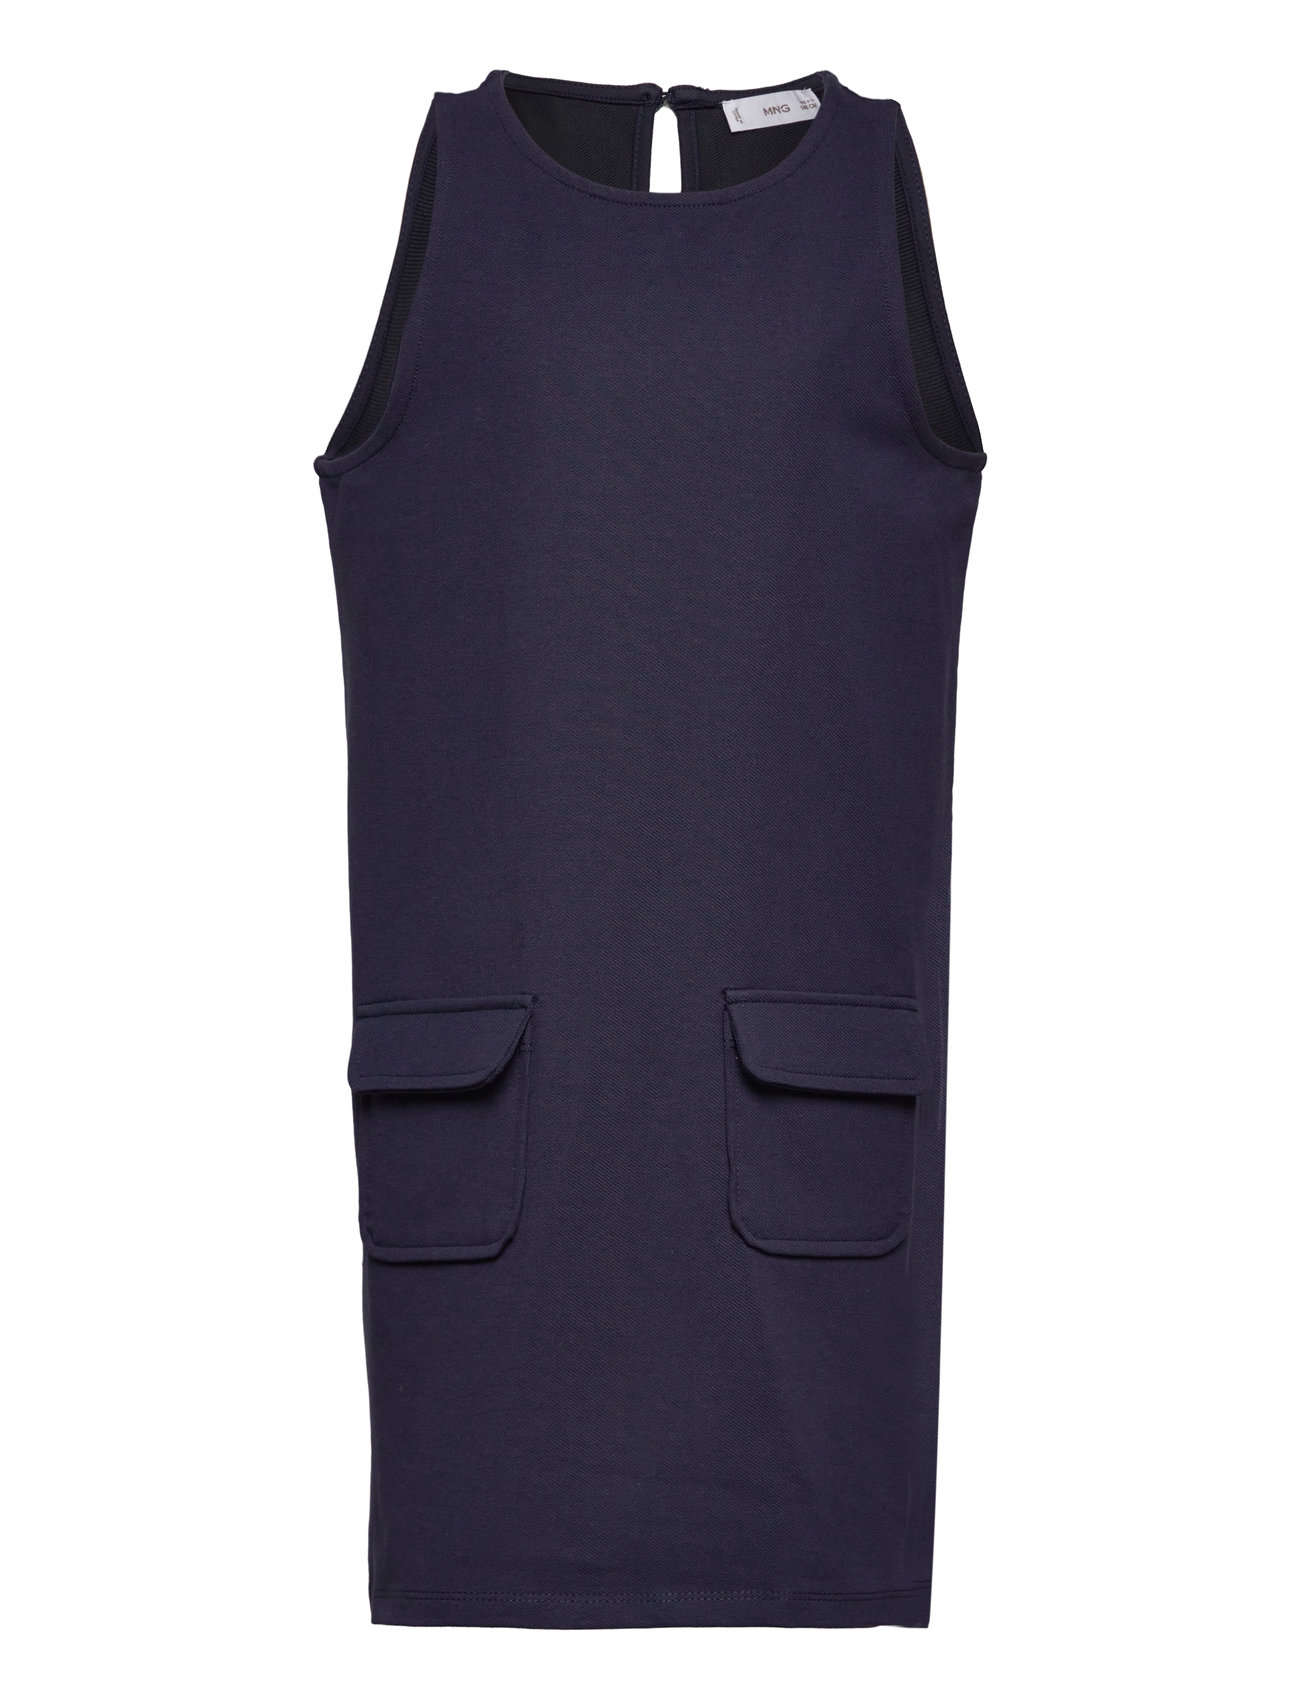 Knitted Pinafore Dress Dresses & Skirts Dresses Casual Dresses Sleeveless Casual Dresses Navy Mango